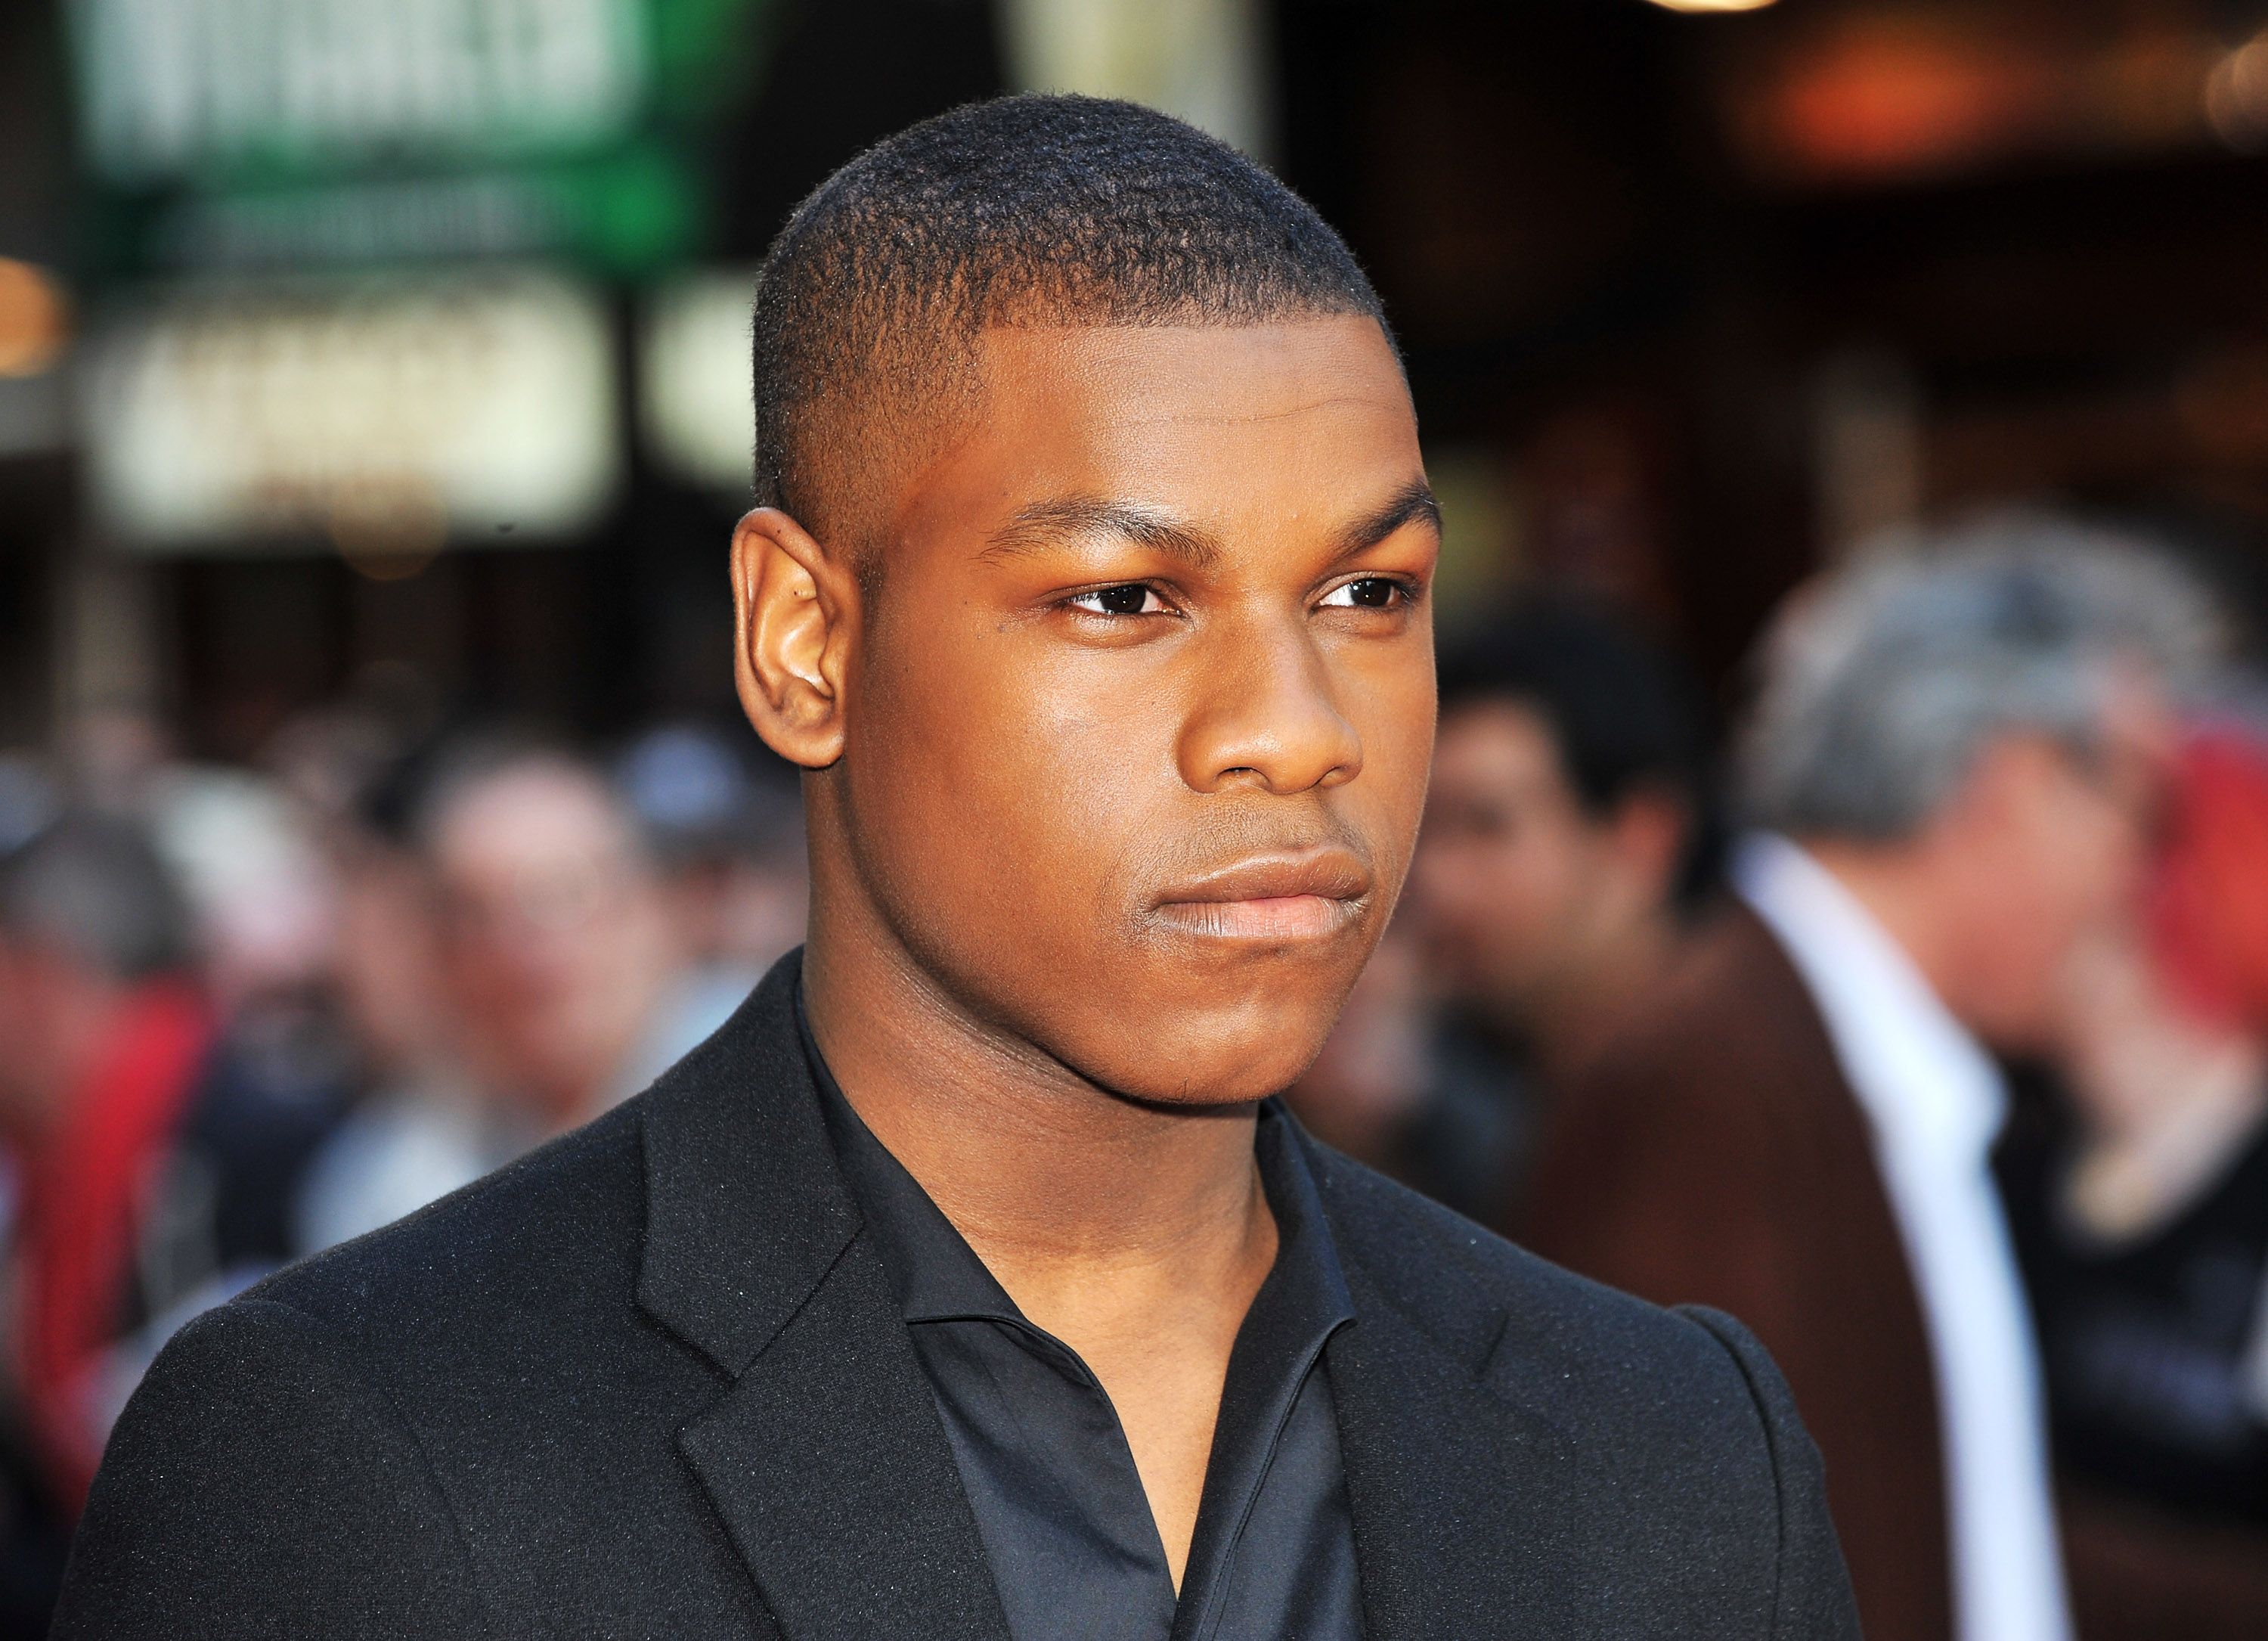 Actor John Boyega at the UK premiere of "Attack the Block" in May 2011. | Photo: Getty Images